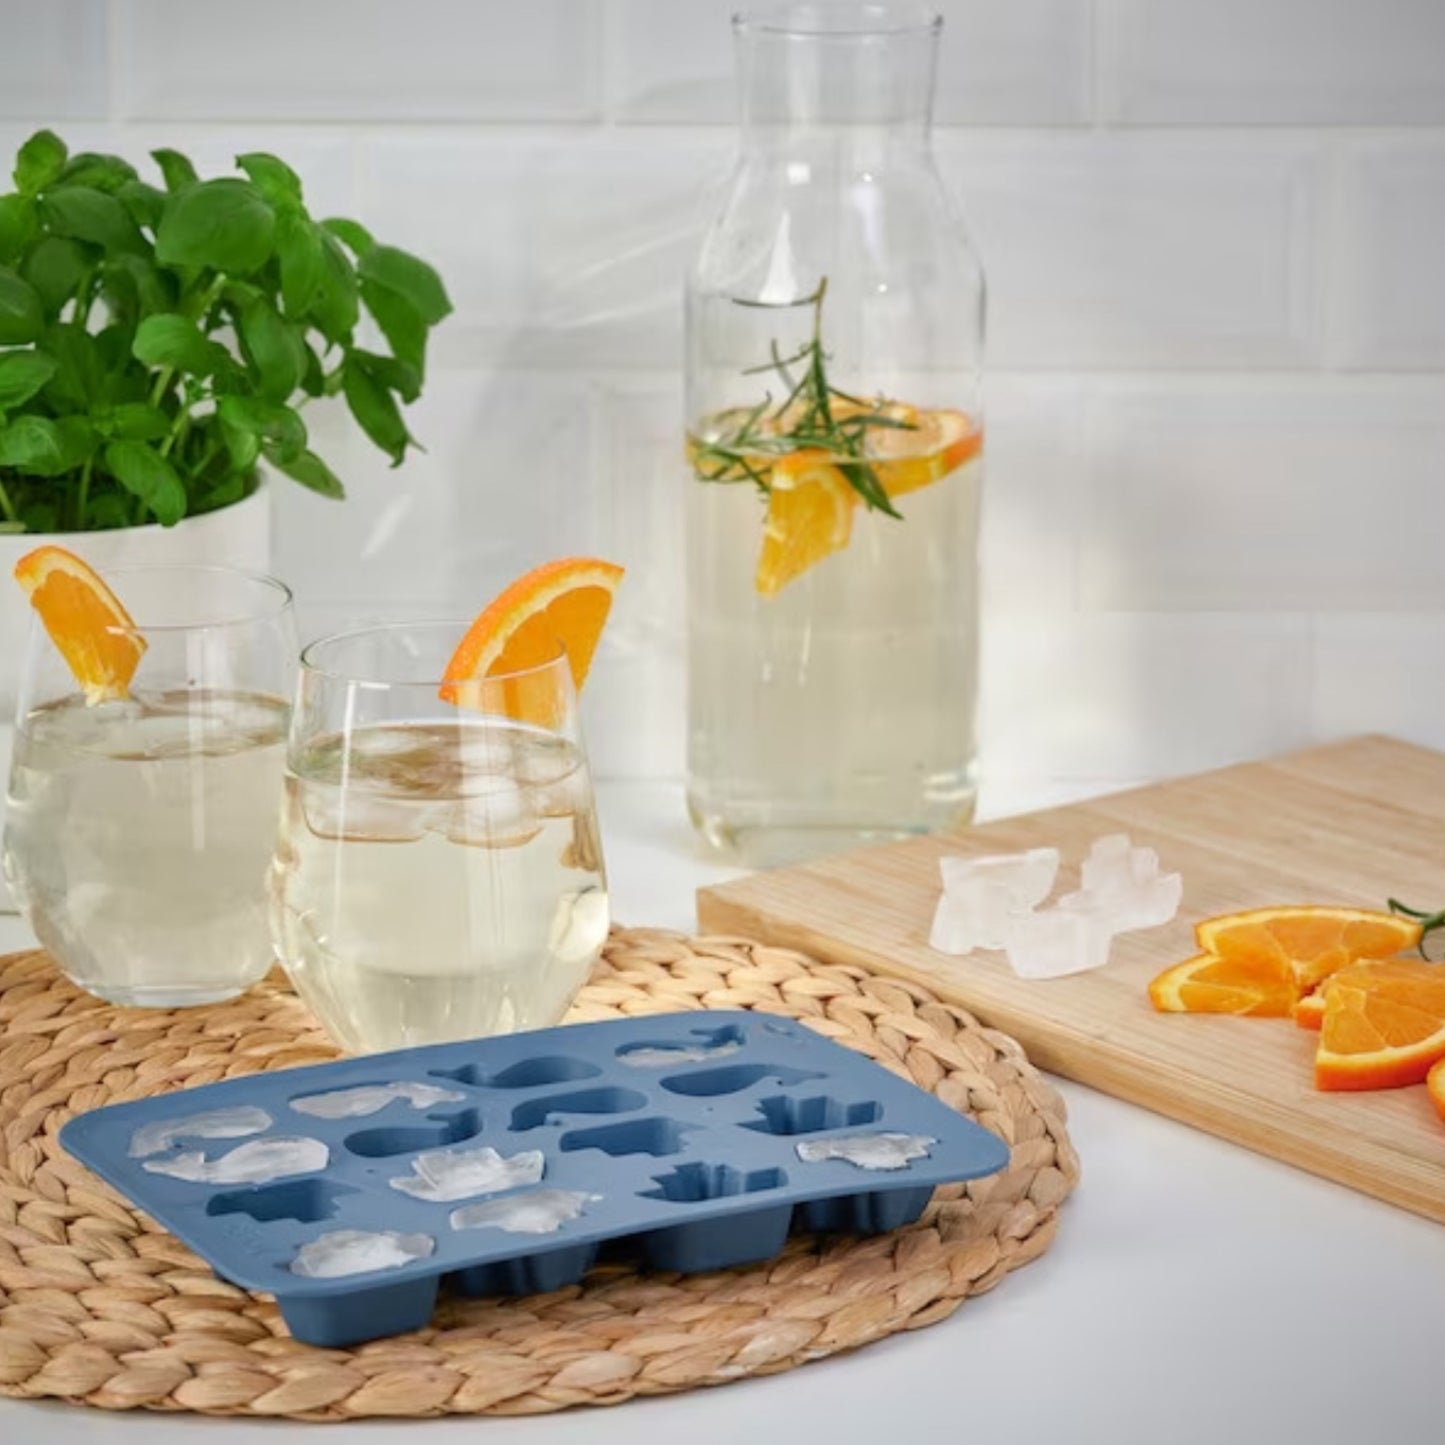 Ice cube mold - Bring the Summer Feeling into your home!